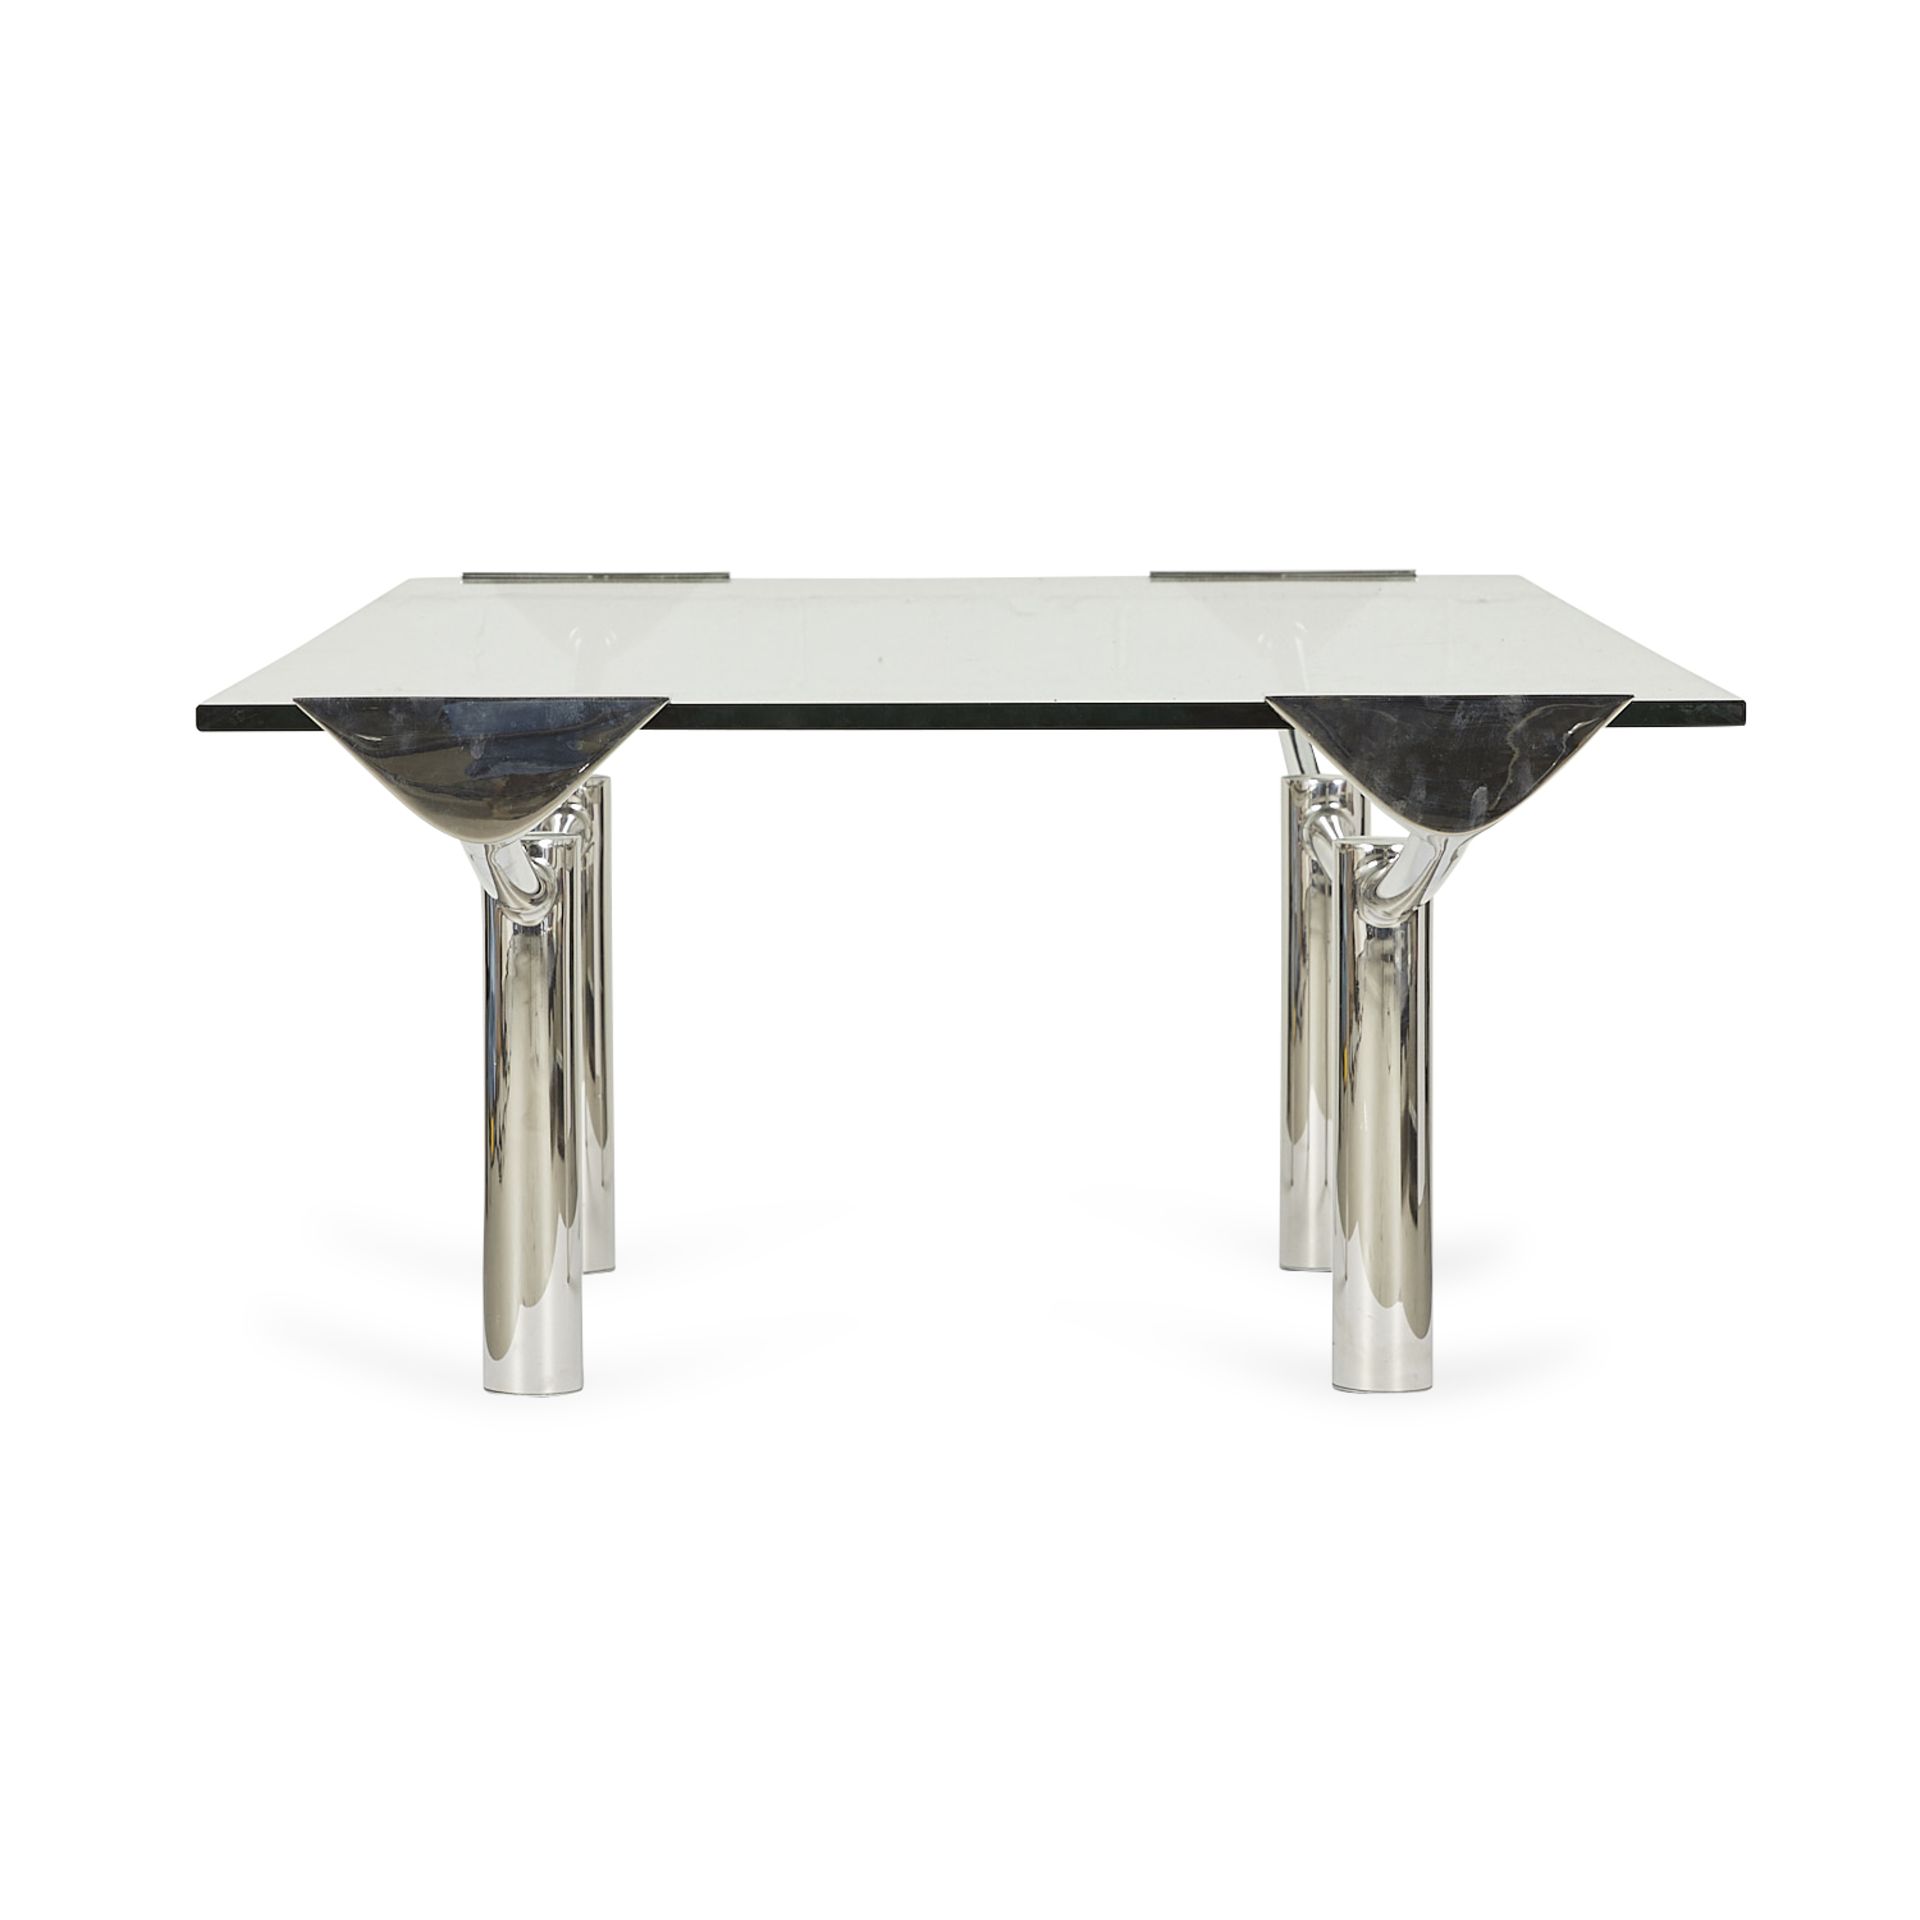 Brueton "Structures" Low Coffee Table w/ Glass Top - Image 4 of 12